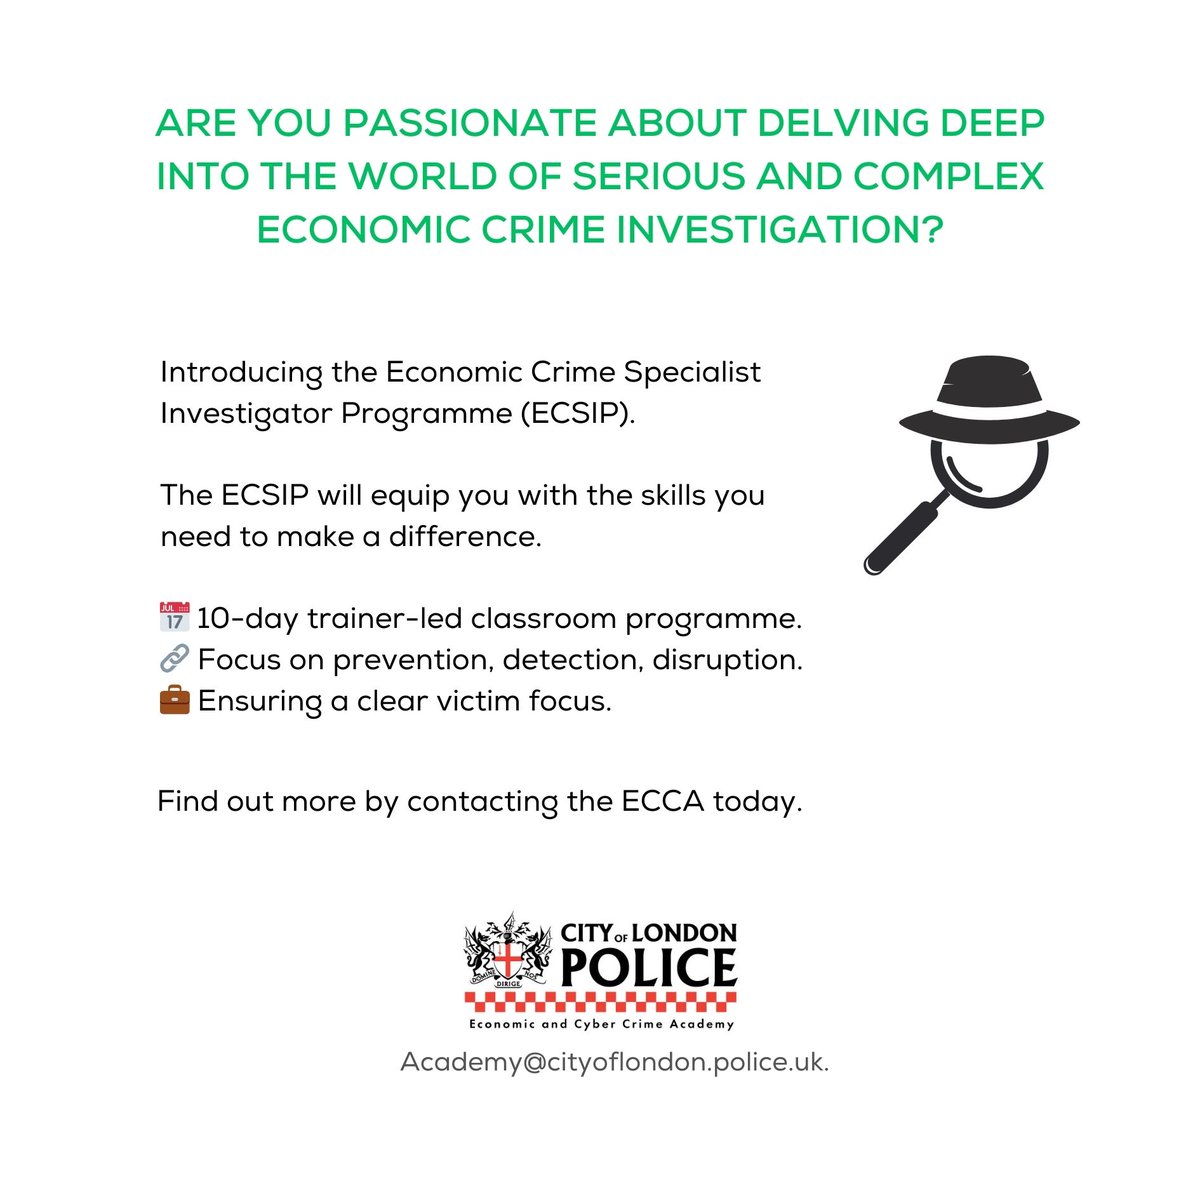 Are you wanting to take your investigation skills in economic crime to the next level? Then contact the Economic and Cyber Crime Academy today to find out more about what courses are on offer: bit.ly/3wqdCOa